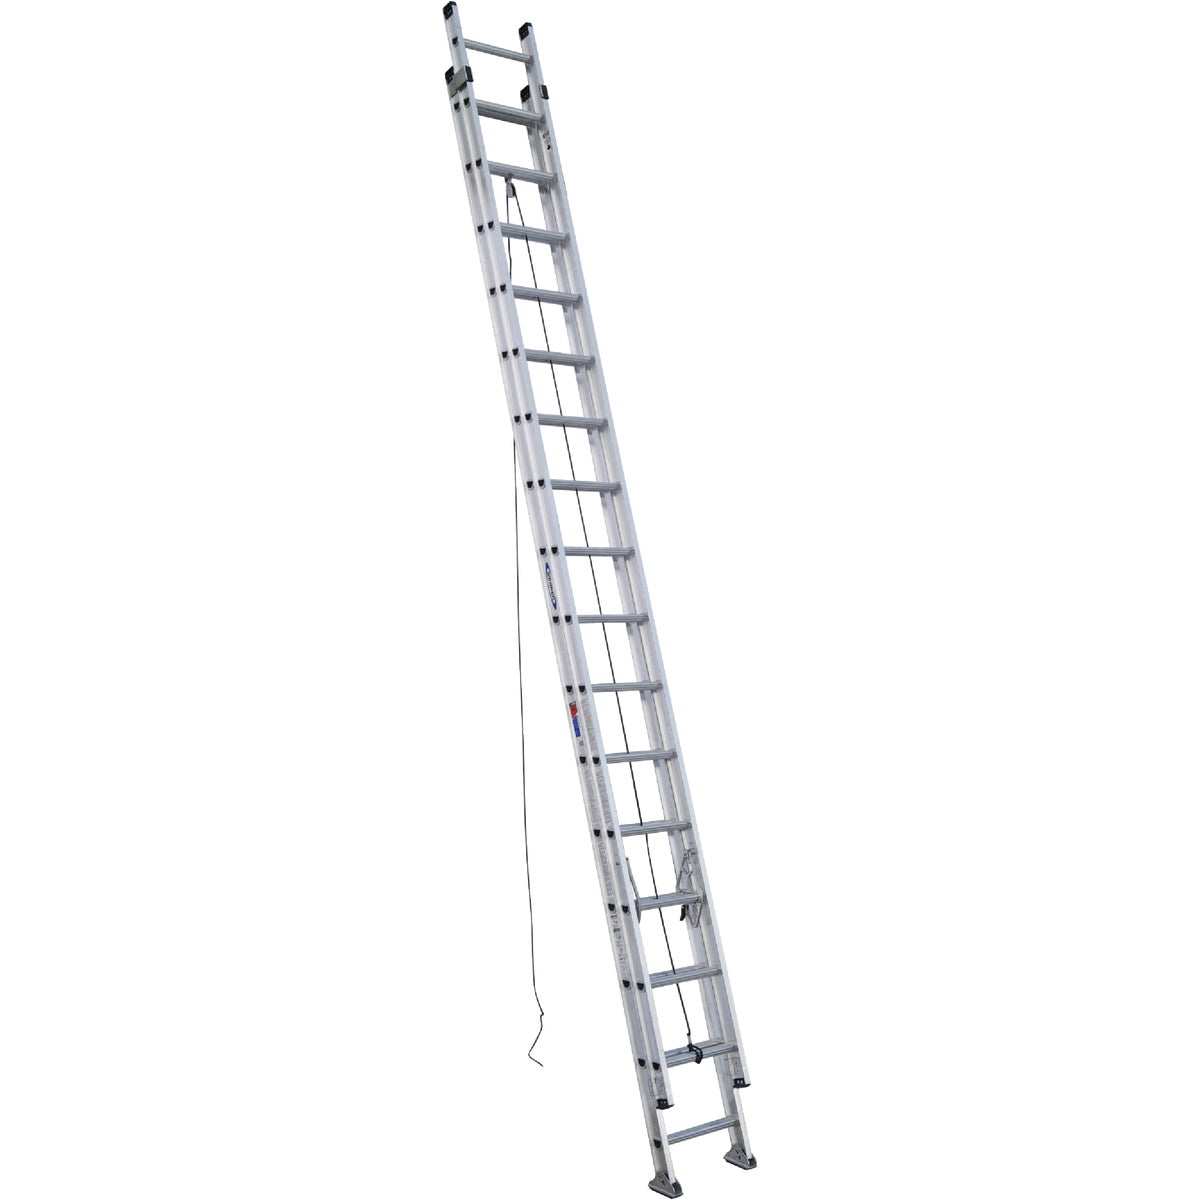 Werner 32 Ft. Aluminum Extension Ladder with 300 Lb. Load Capacity Type IA Duty Rating